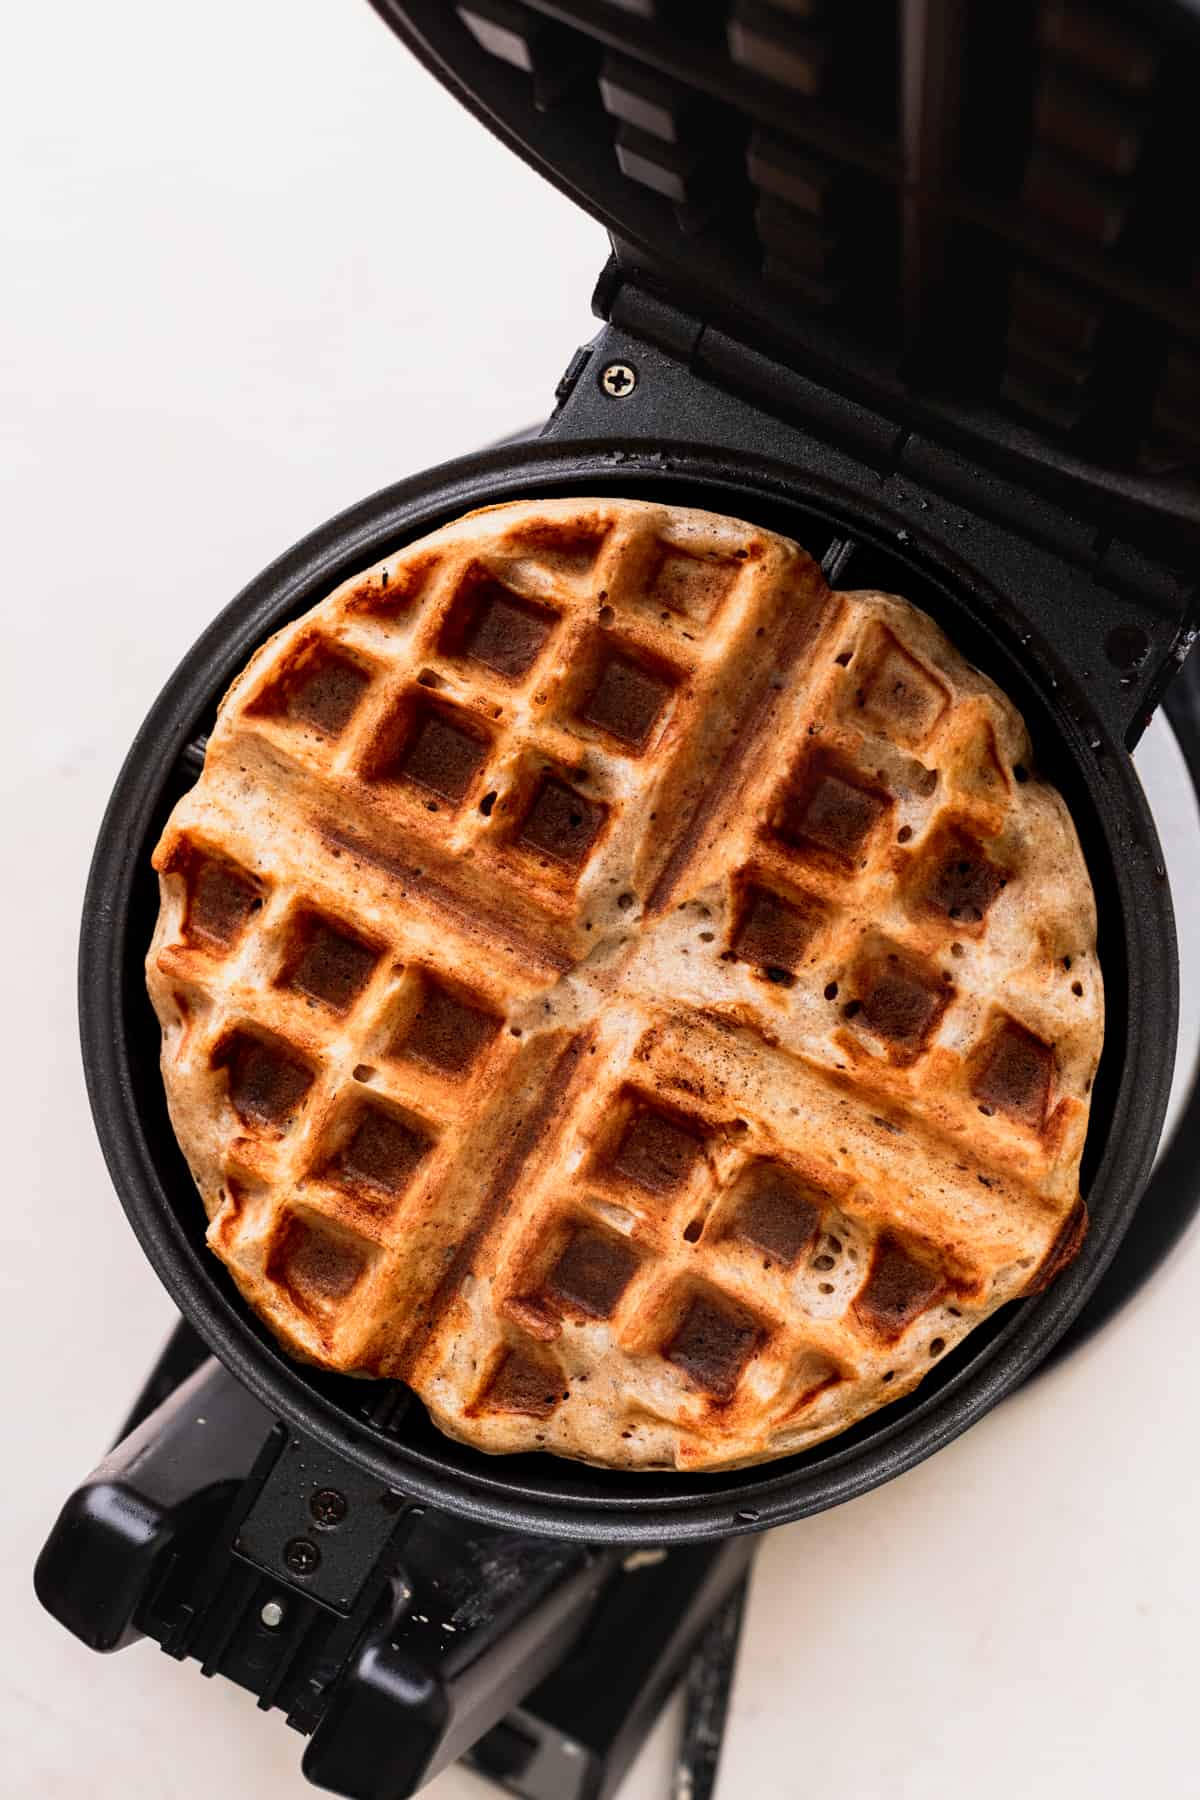 Baked waffle in the waffle batter.